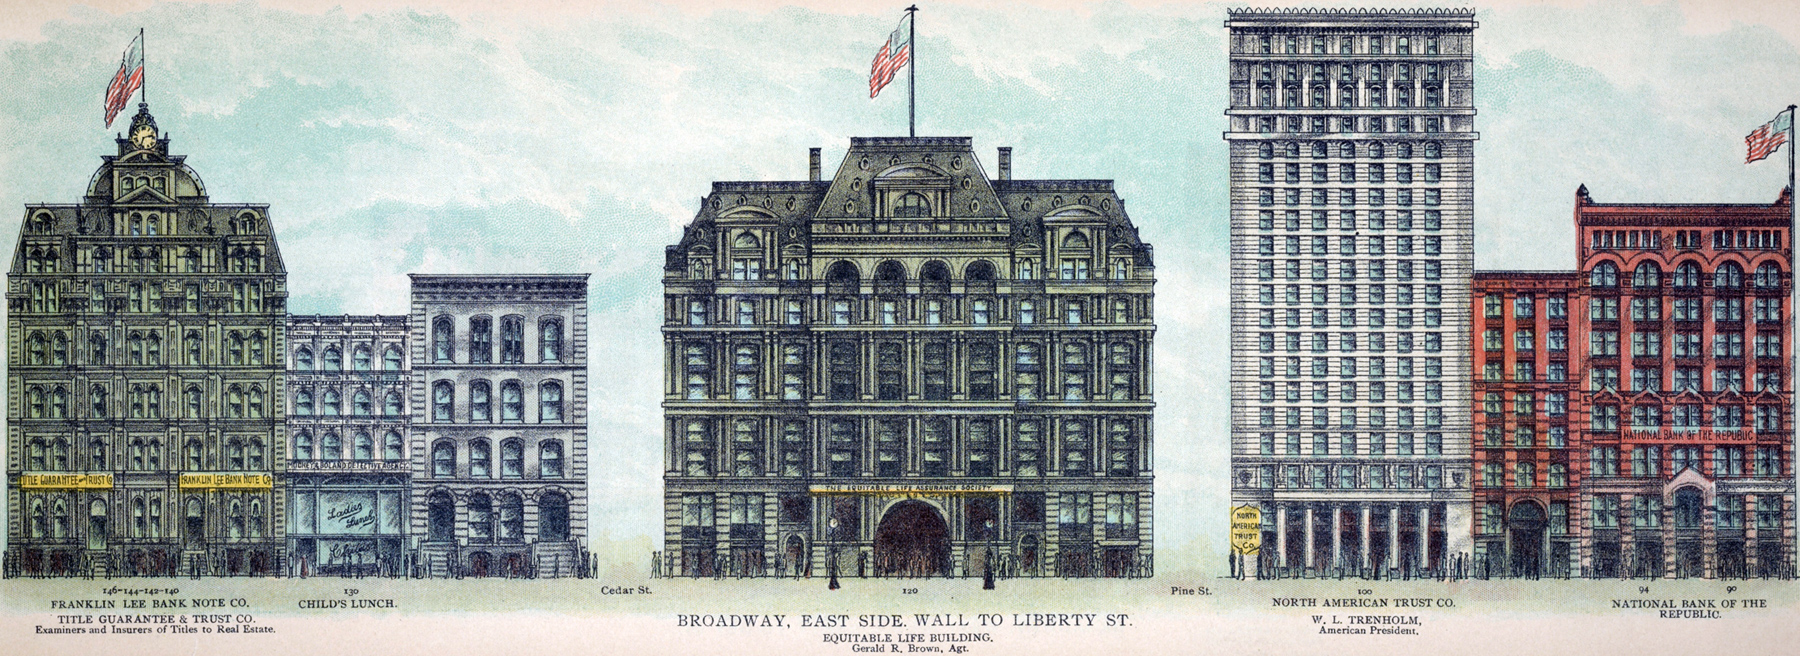 Equitable Life Building